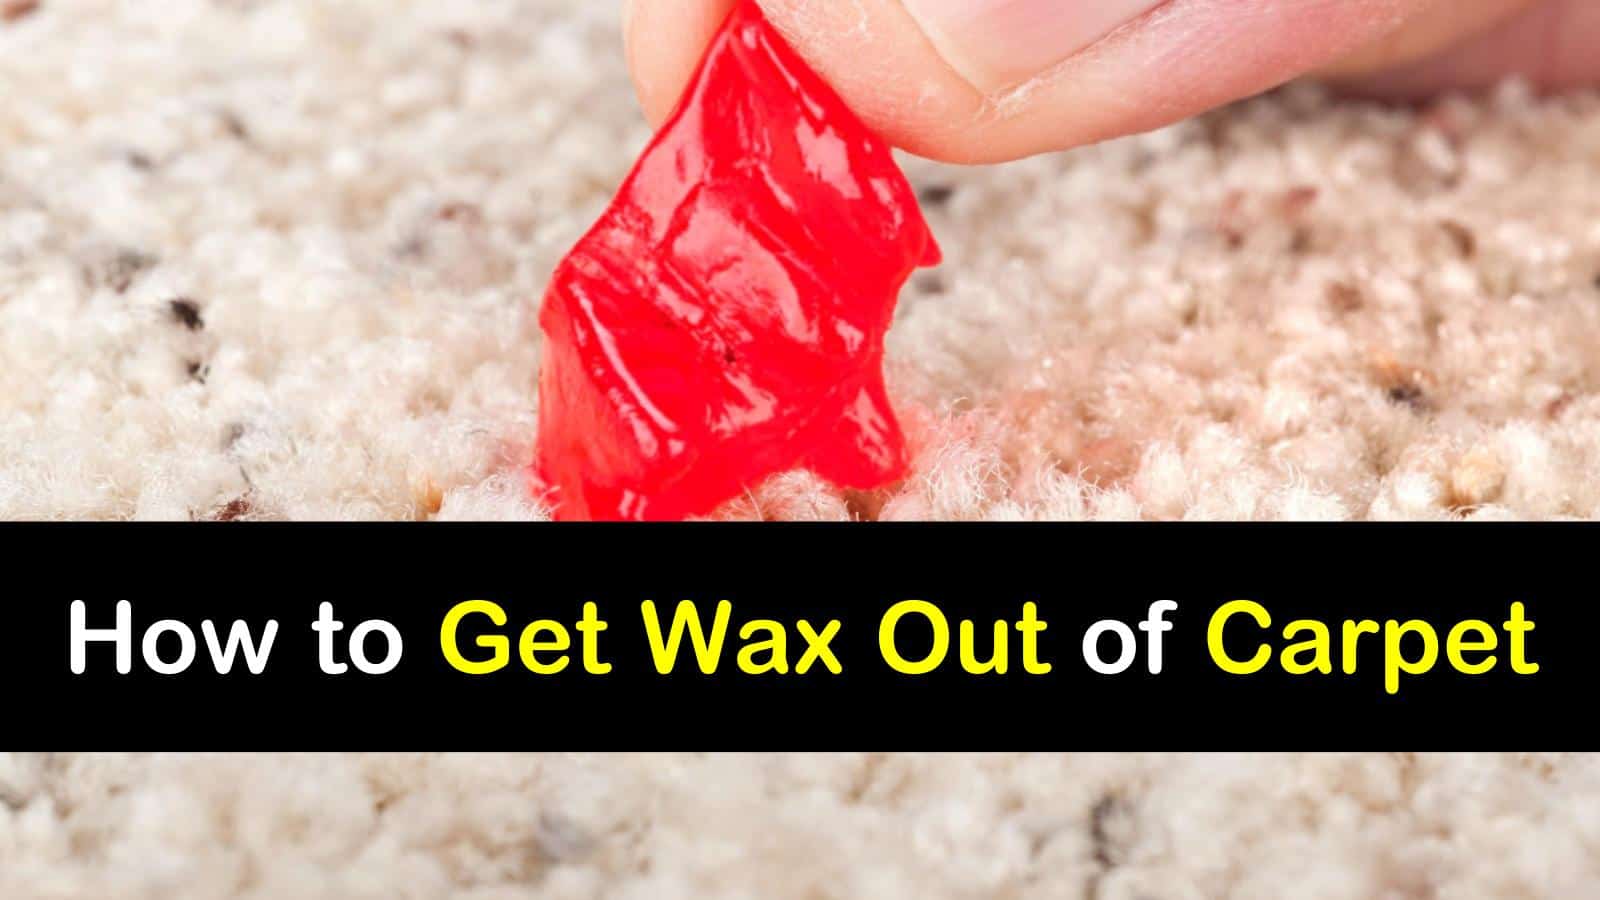 How to Get Wax Out of Carpet titlimg1